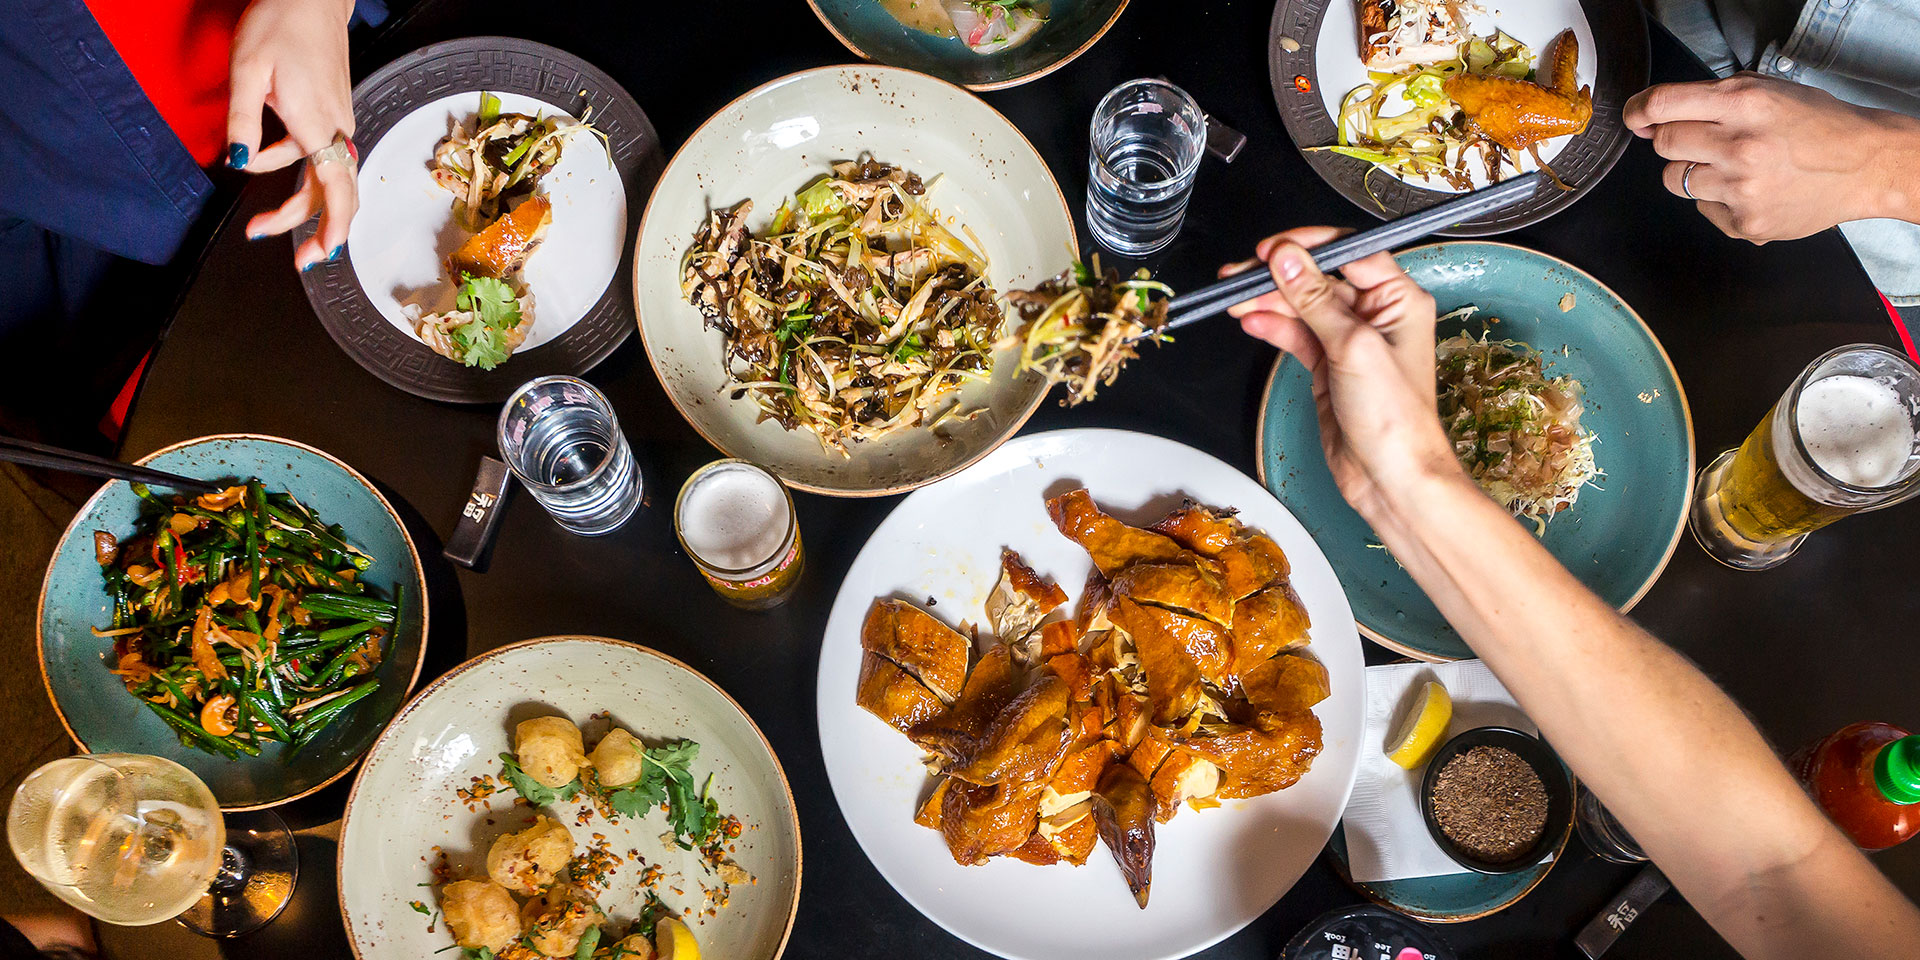 Take Your Taste Buds on a Culinary Adventure, Hong Kong Style